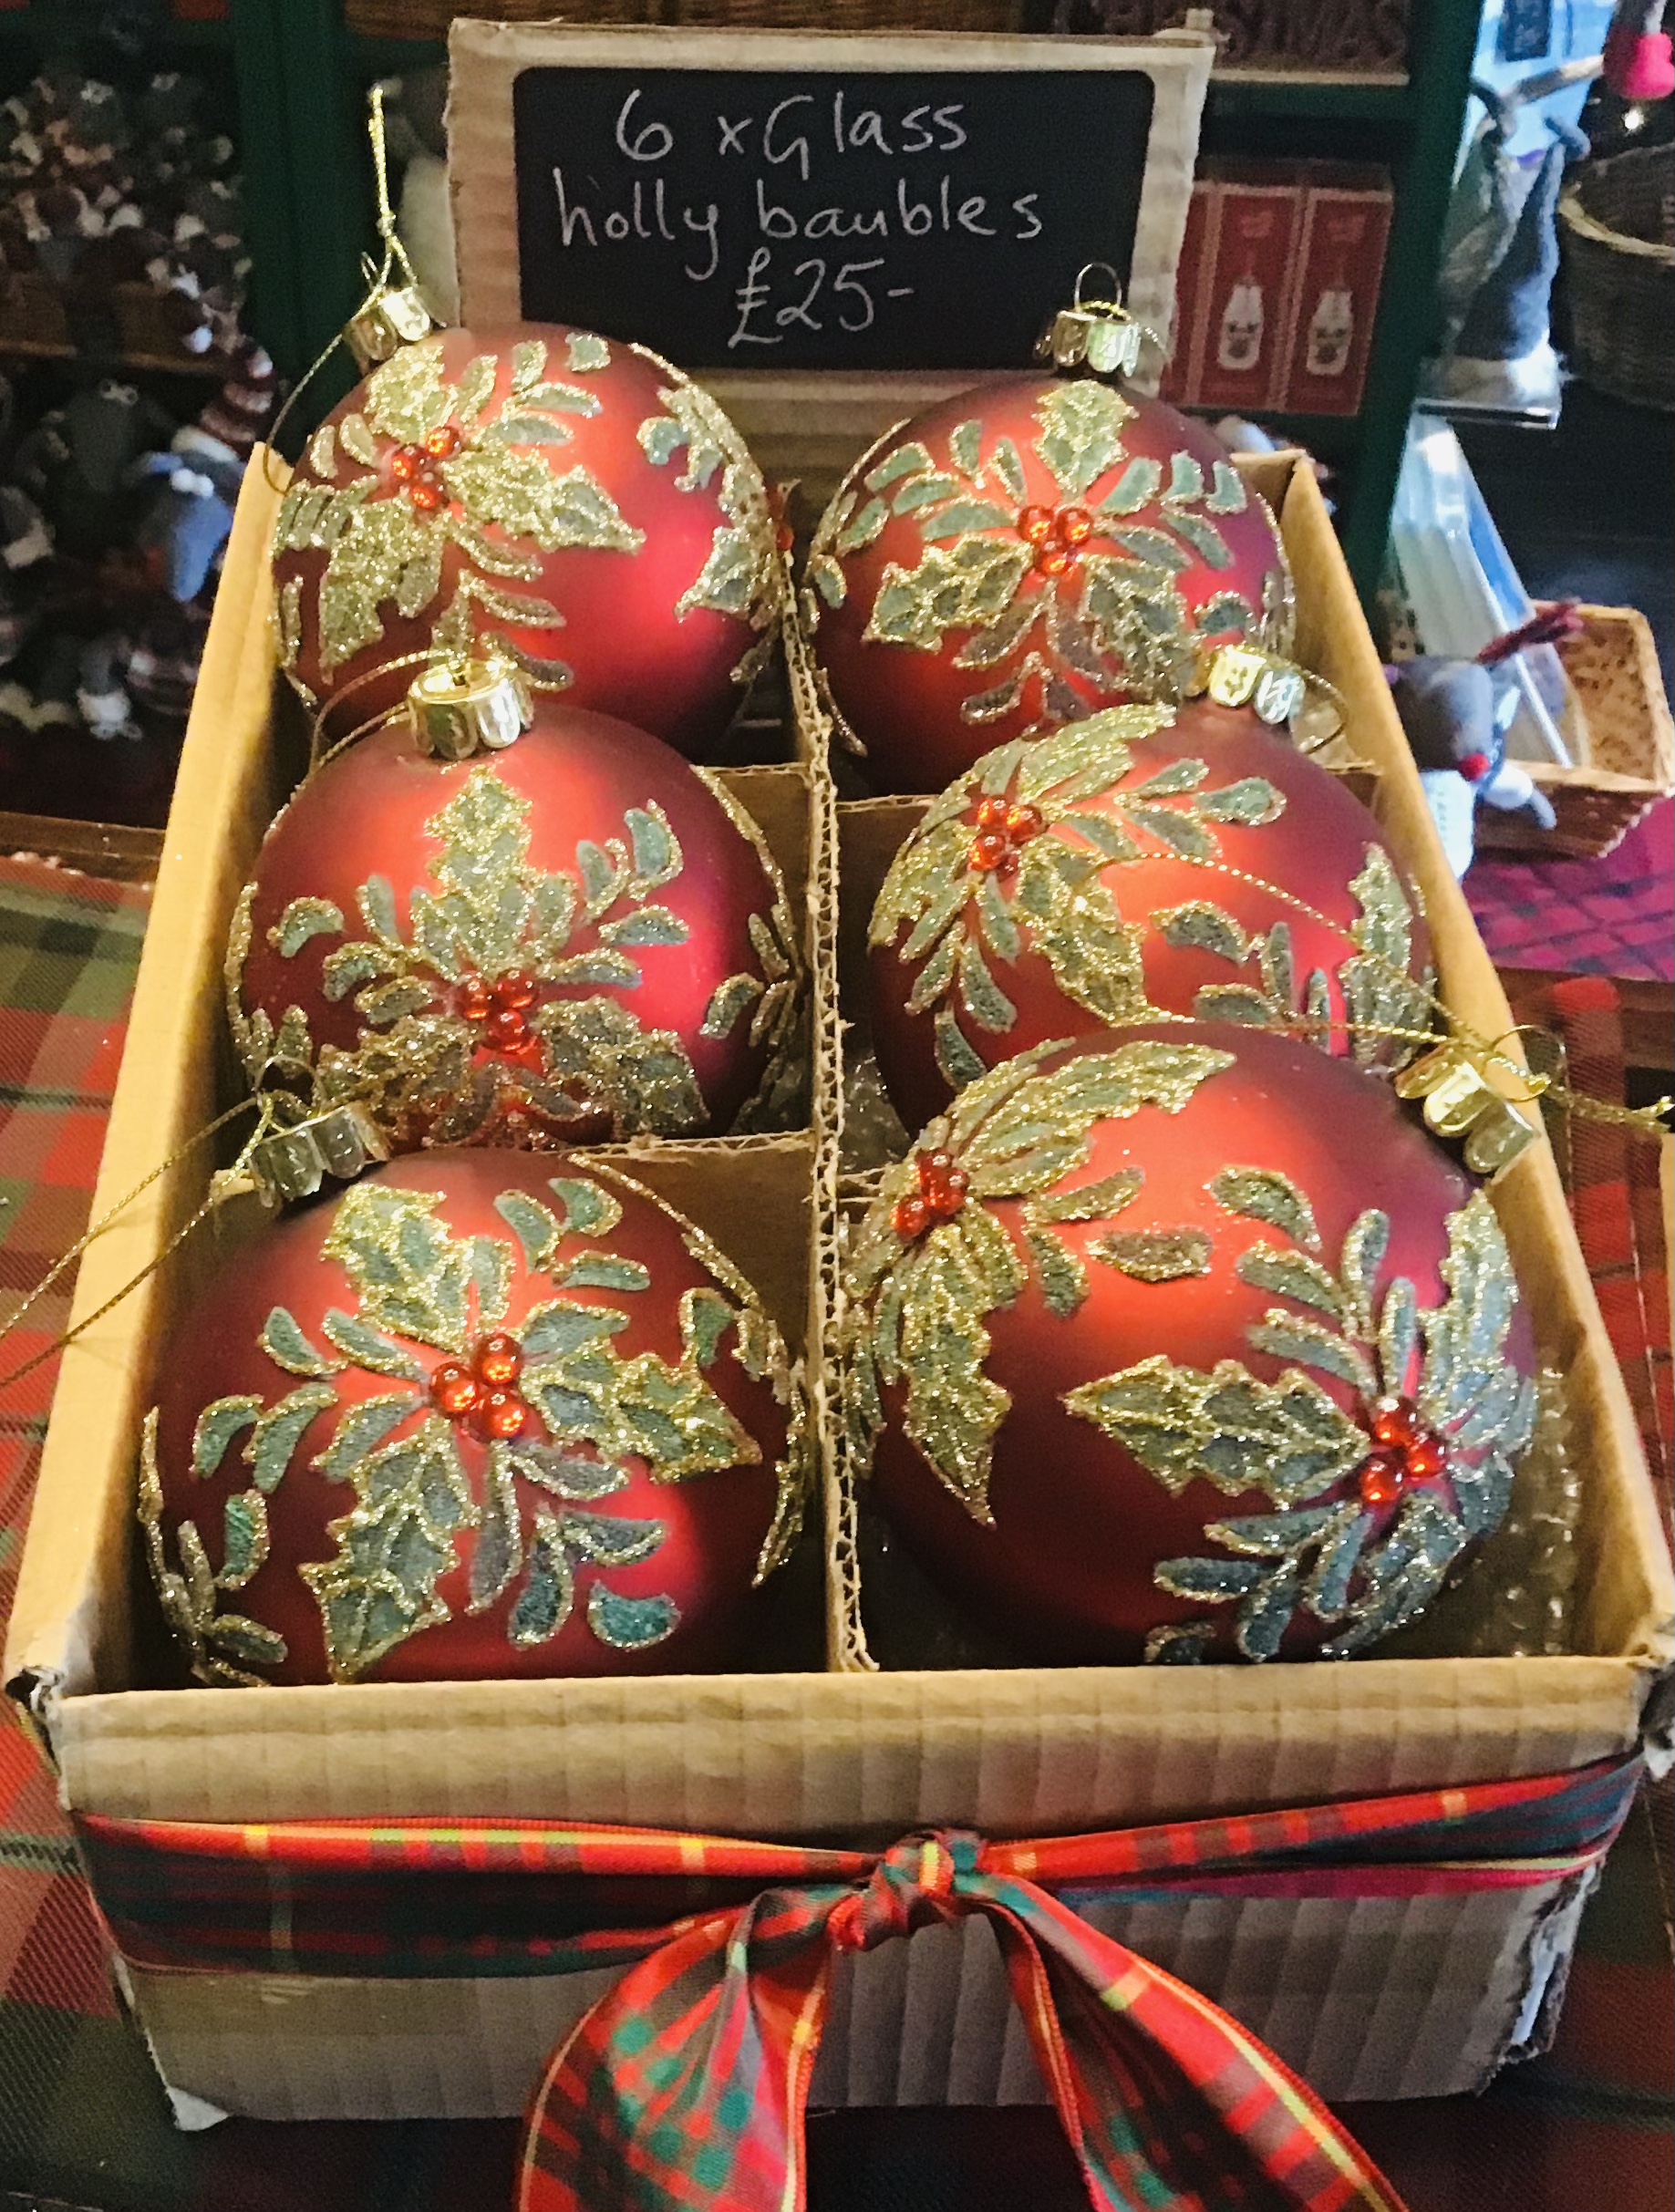 Box of 6 glass baubles / red with holly